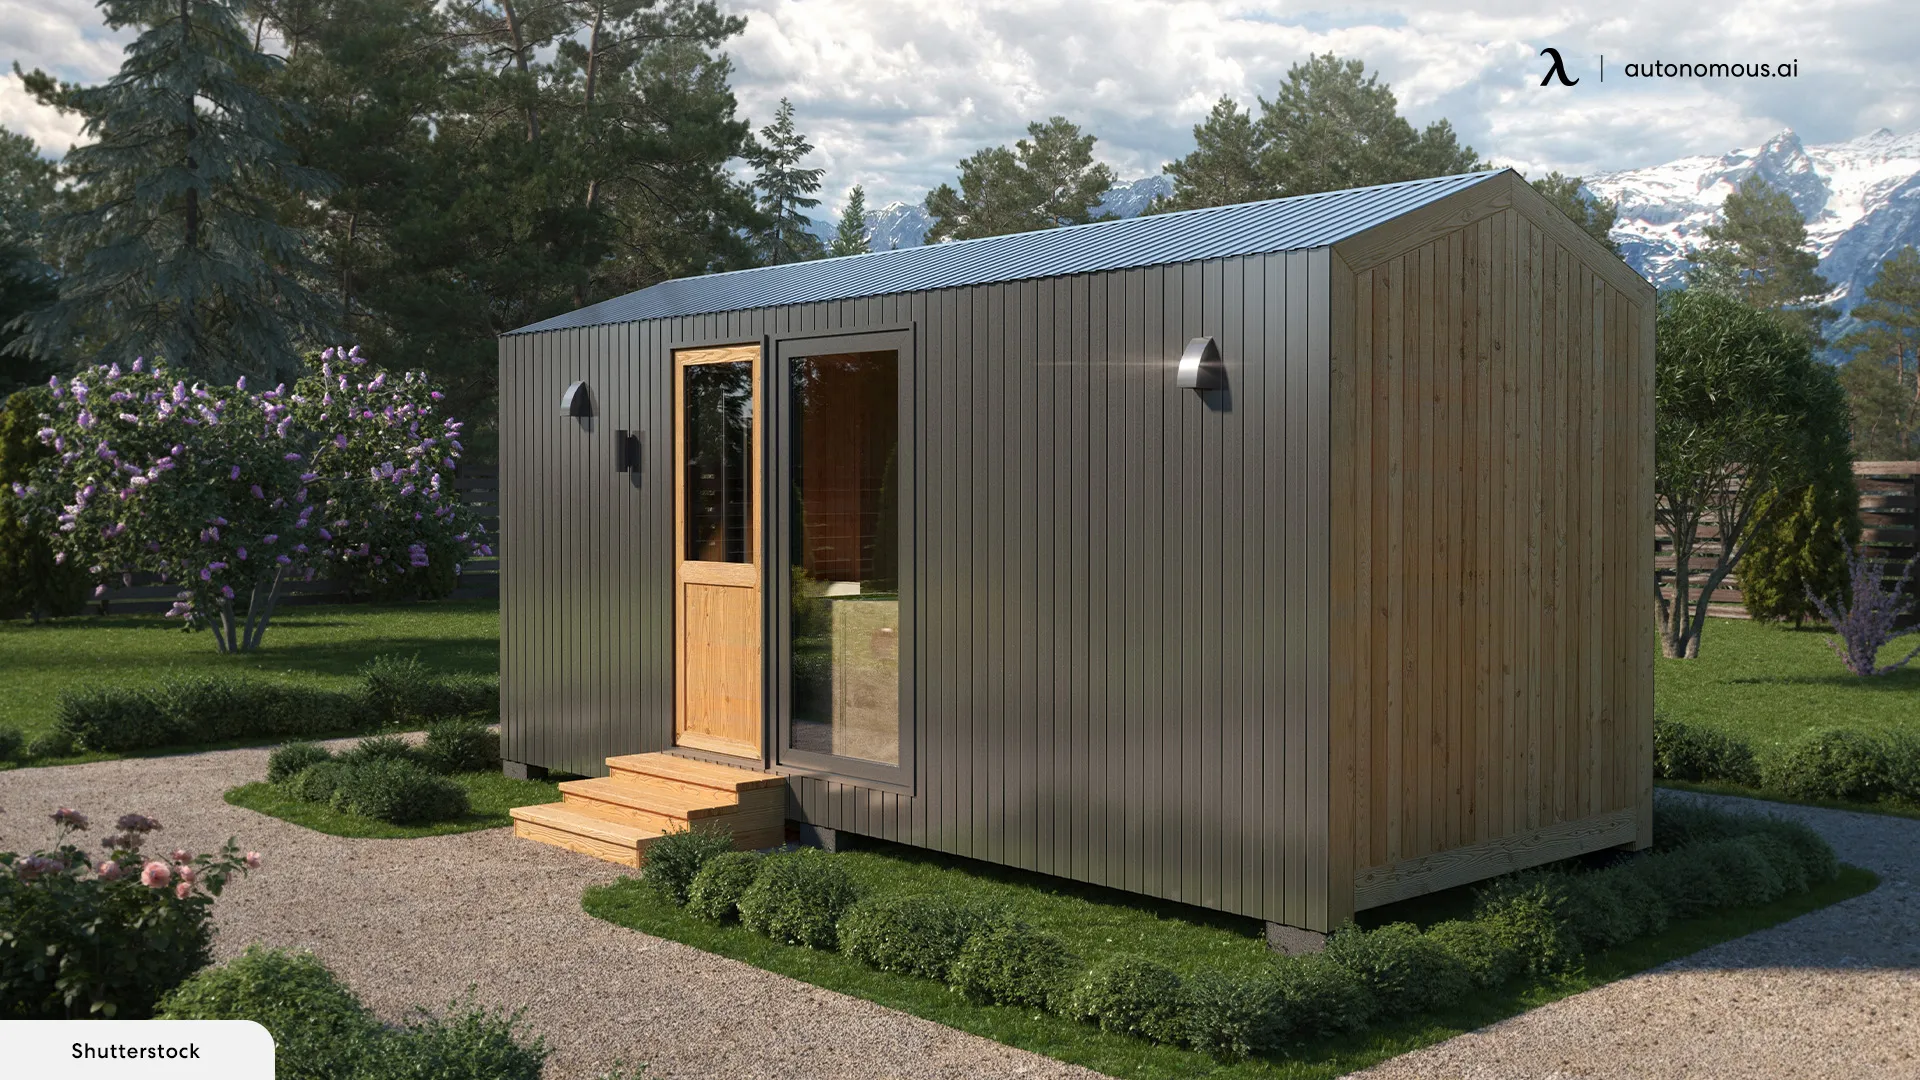 Pros and Cons of Tiny Homes vs ADUs